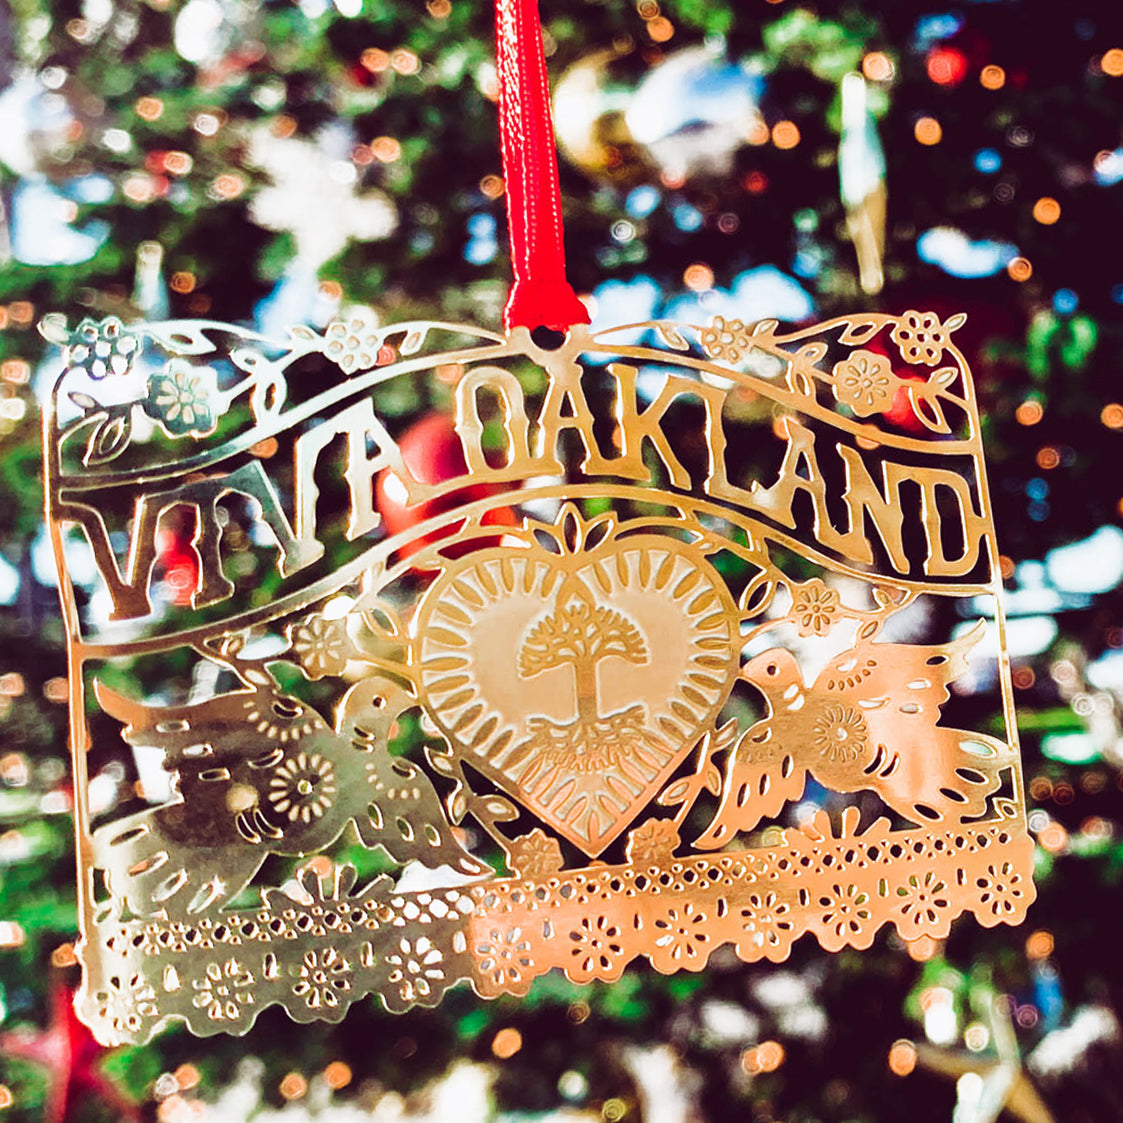 Front side of brass ornament with Viva Oakland design with heart, birds and flowers and a red string hanging on a Christmas tree.